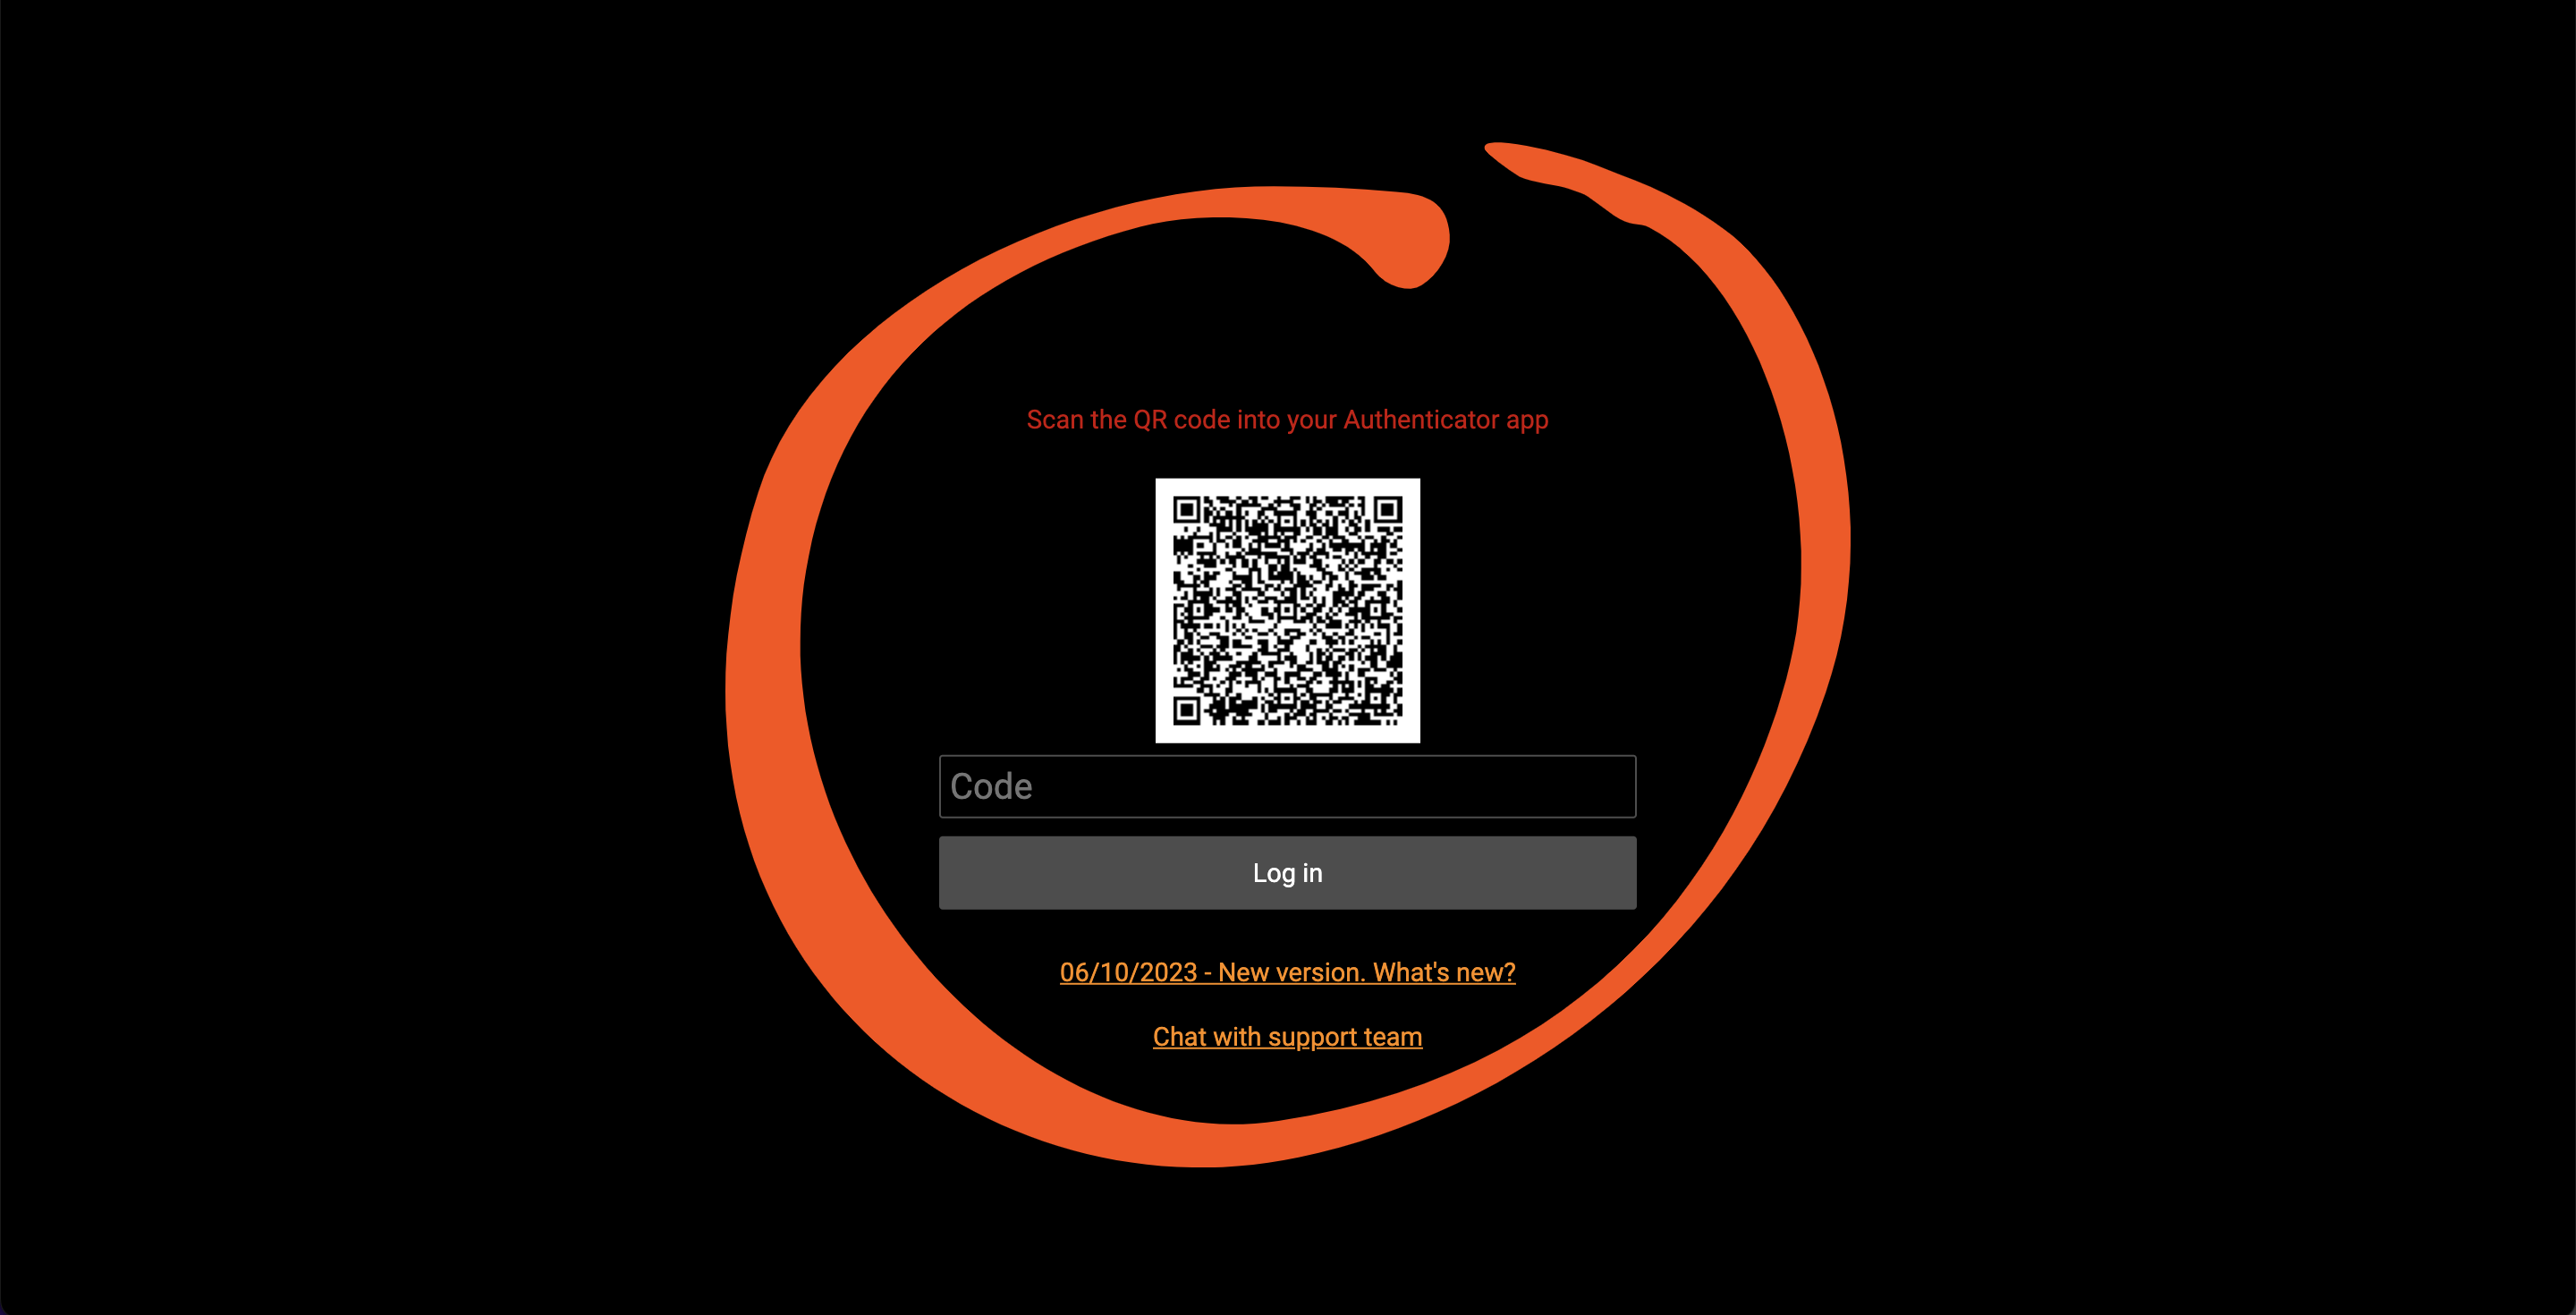 Scanning QR code to Authenticator